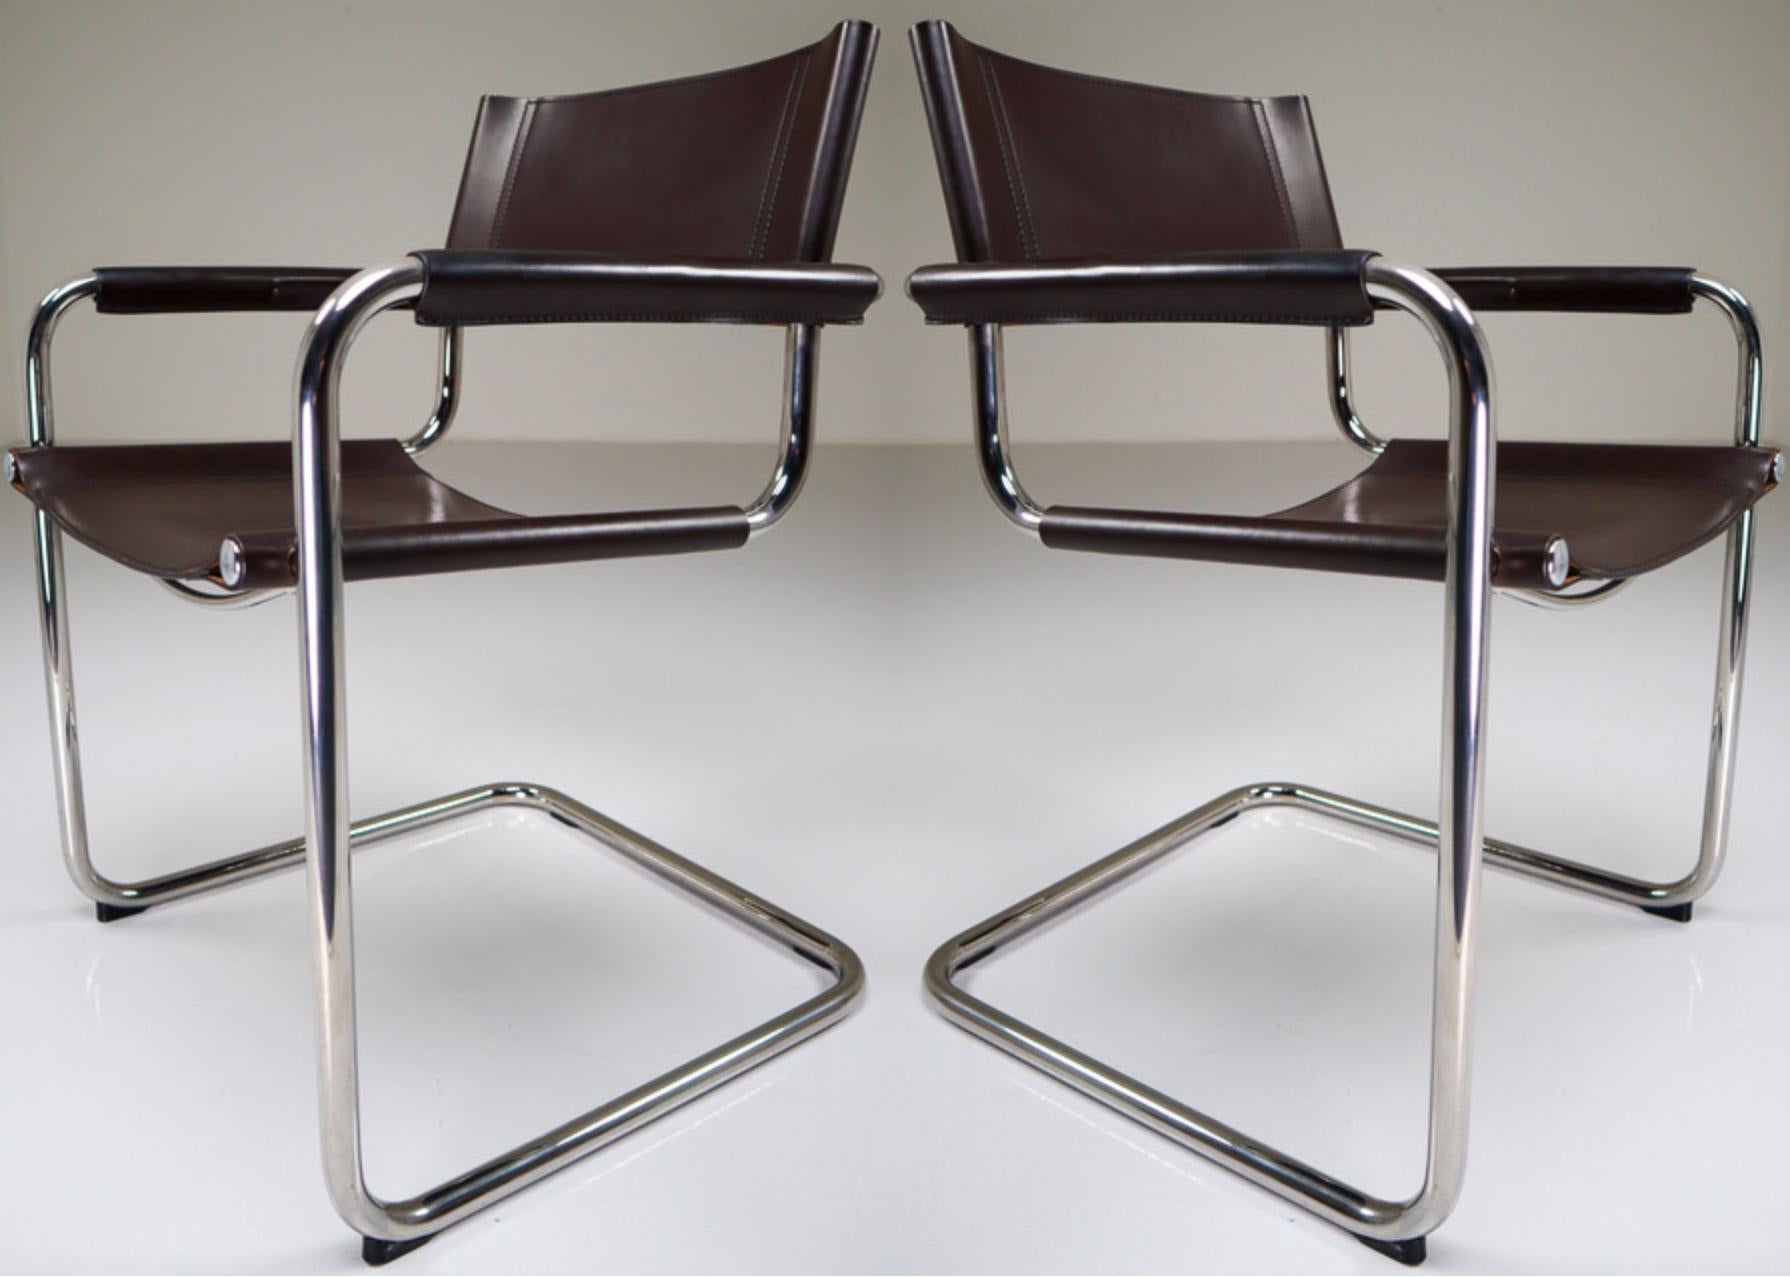 Mart Stam Model S33 leather Cantilever chairs by Fasem Italy 

A beautiful large set of 35 Mart Stam Model S33 leather cantilever chairs by Fasem, Italy, 1980s. The chairs with a chocolate brown leather seat, back and arms on a cantilevered chrome